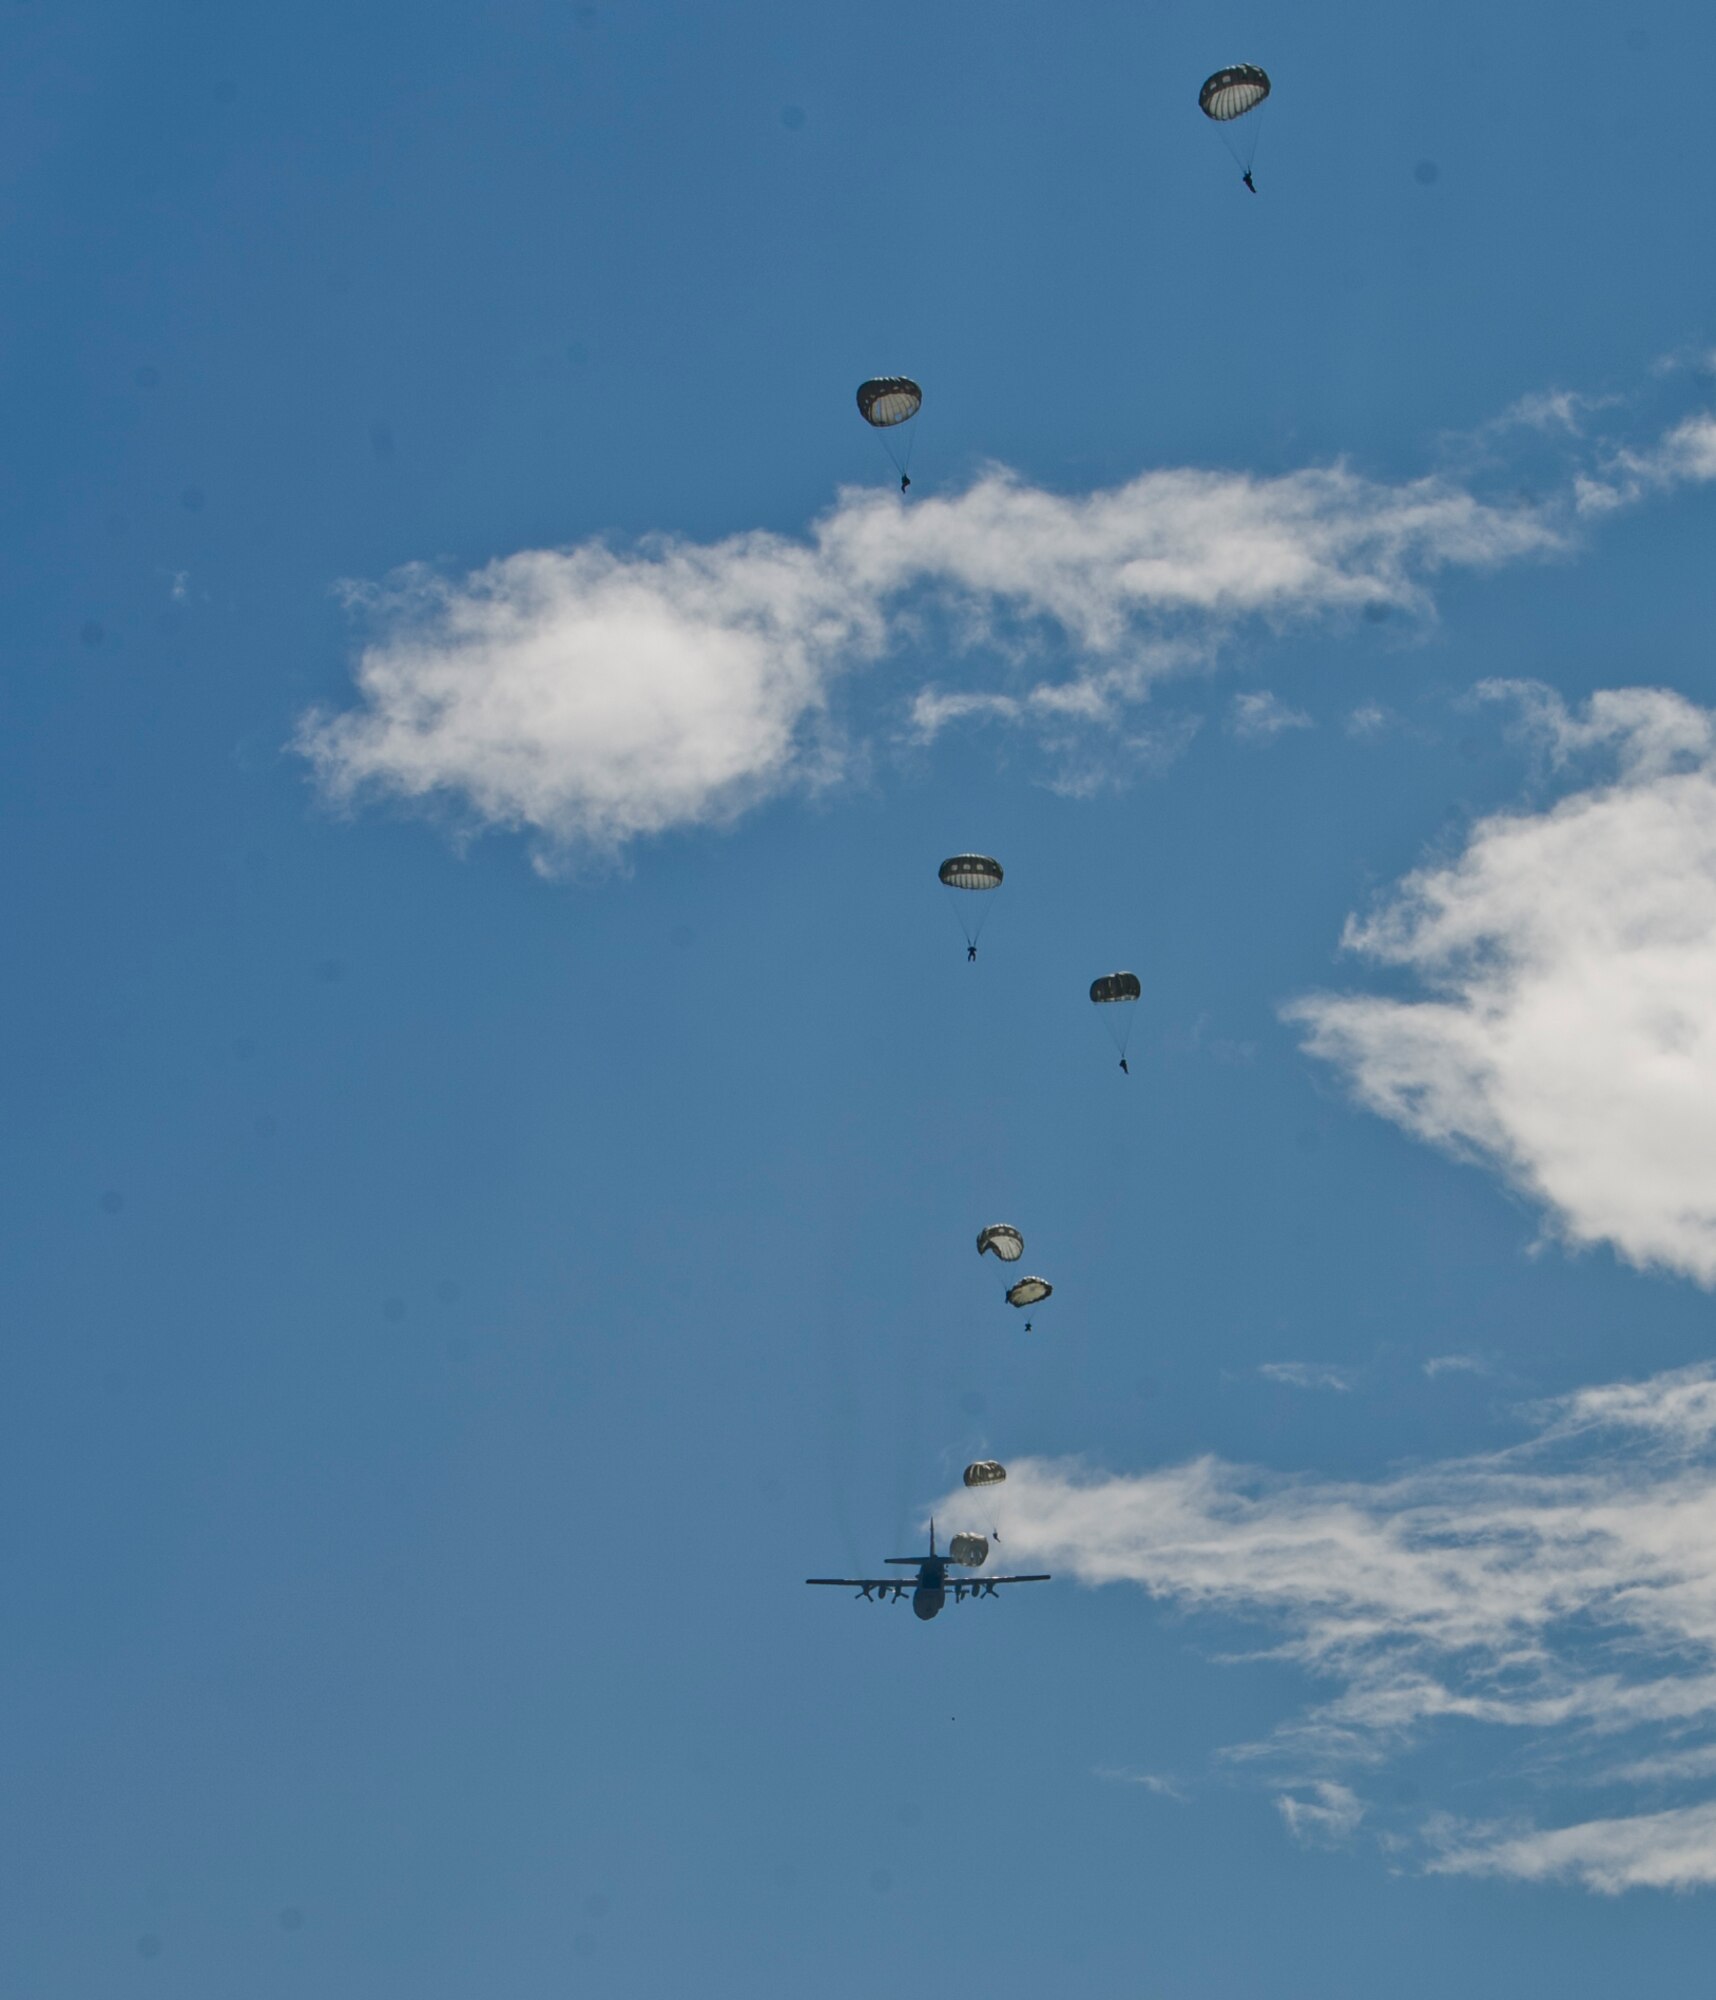 A C-130H Hercules with the Wyoming Air National Guard, 153rd Airlift Wing finishes dropping members of the Special Operations Command (Forward) 7310 and 2nd Honduran Airborne Brigade Jan. 11, 2016, at Soto Cano Air Base, Honduras, during a training mission. The mission is one of many ways the U.S. and Honduras train together to maintain the relationship between the two nations’ service members. (U.S. Air Force photo by Capt. Christopher Mesnard/Released)